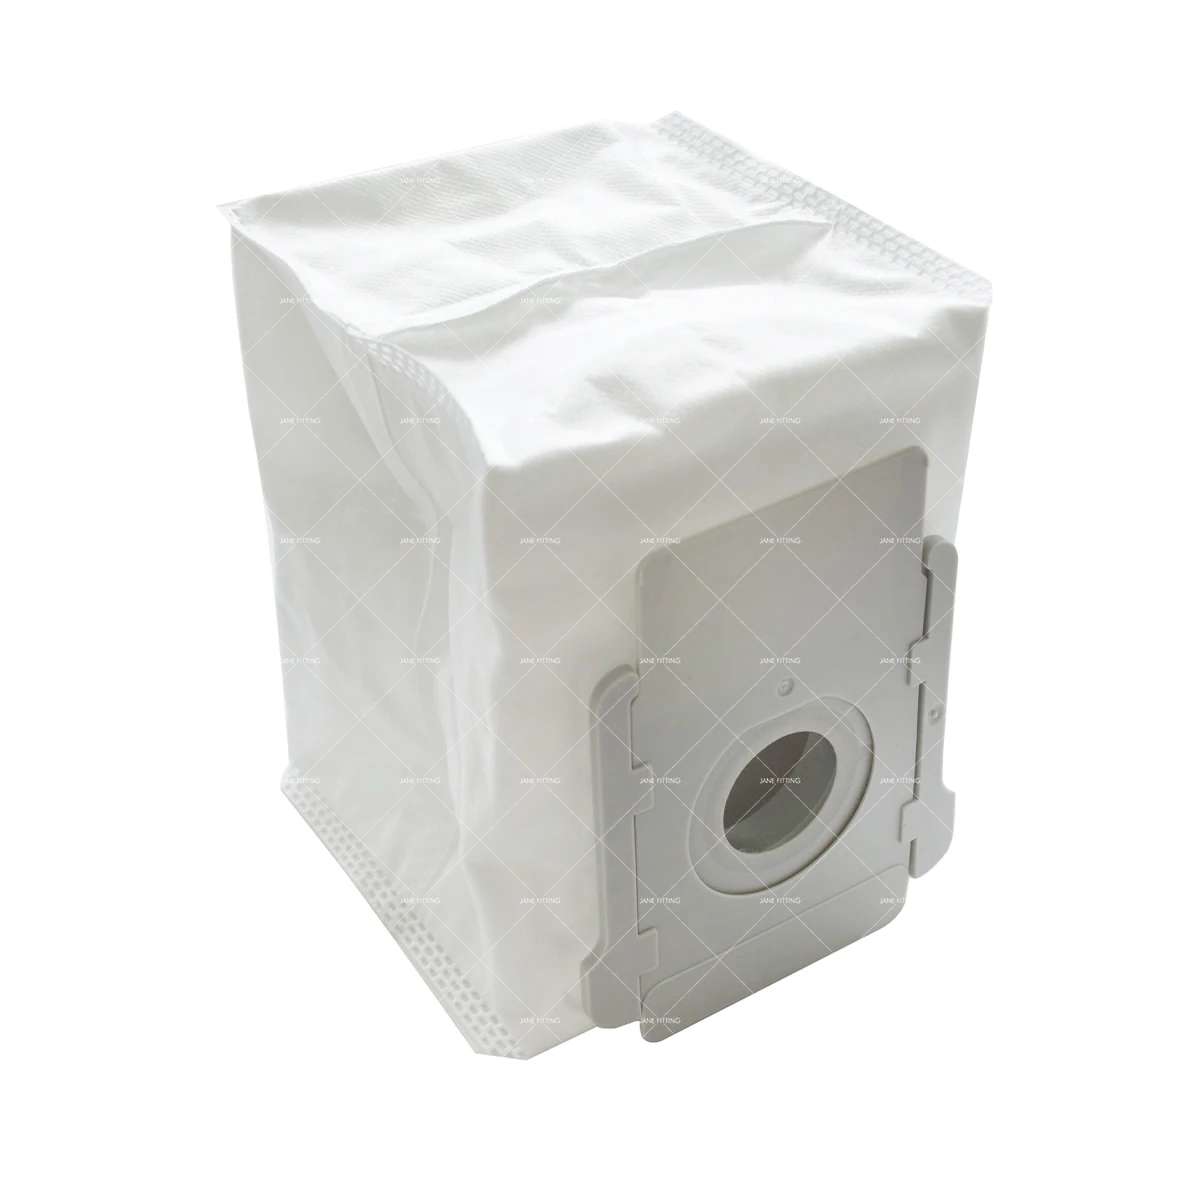 Stock Garbage Dust Bag For Irobots Roombas E5 E6 i7 i7+ S9 Robot Vacuum  Cleaner Parts Accessory Non-Woven Fabric Dust Filter Bag